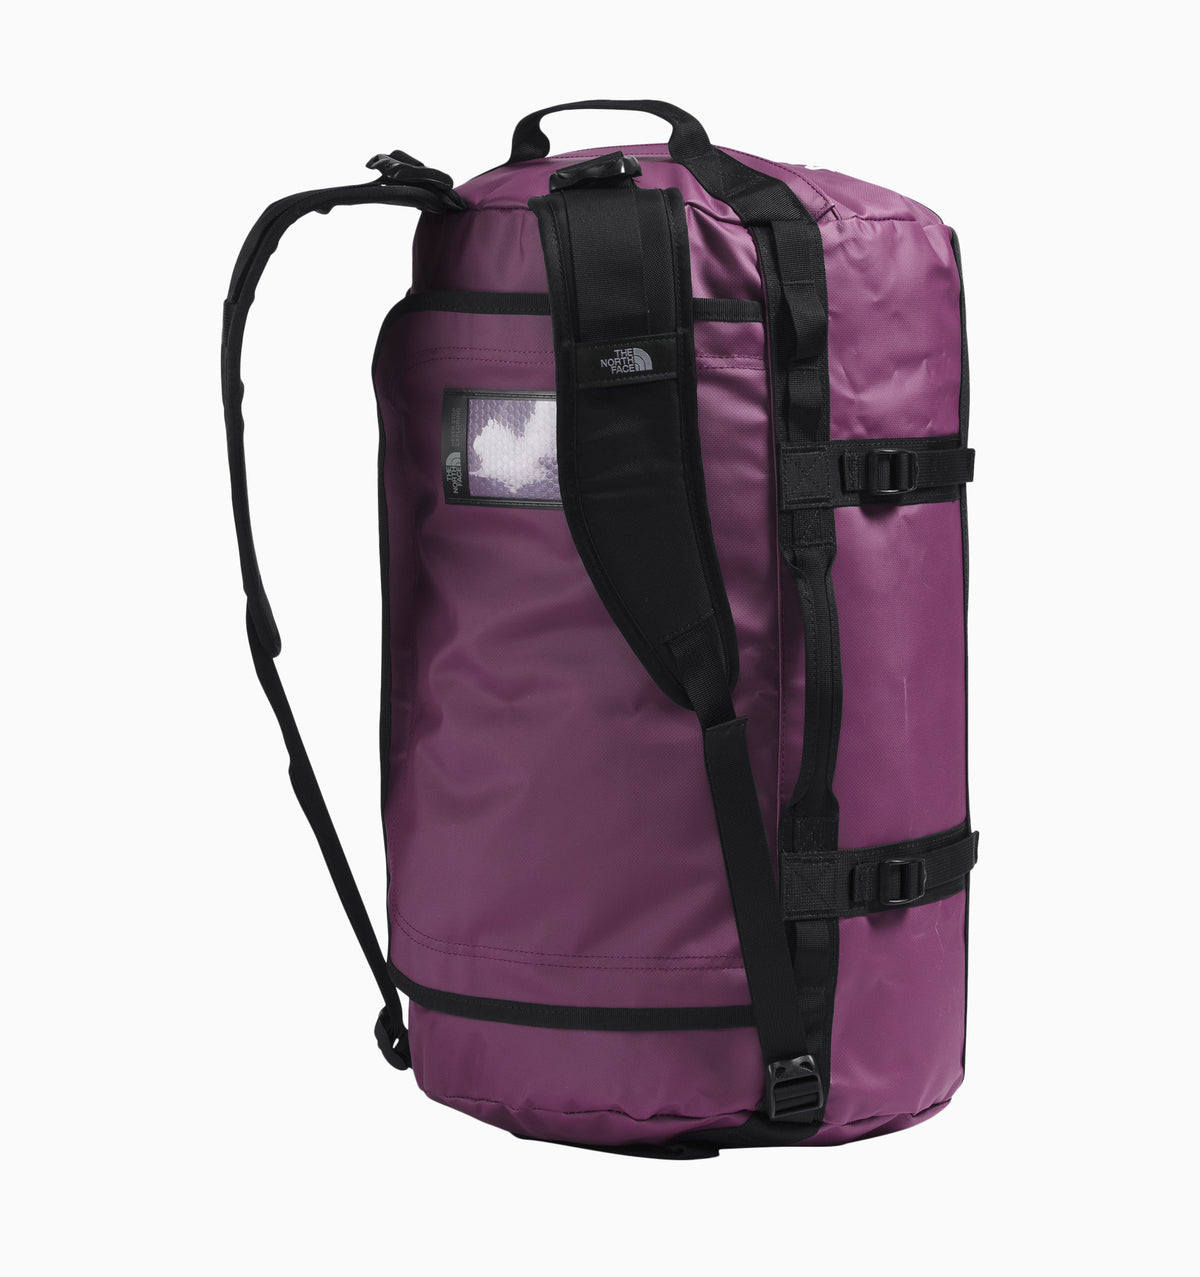 The North Face Base Camp Duffle - S - Black Currant Purple